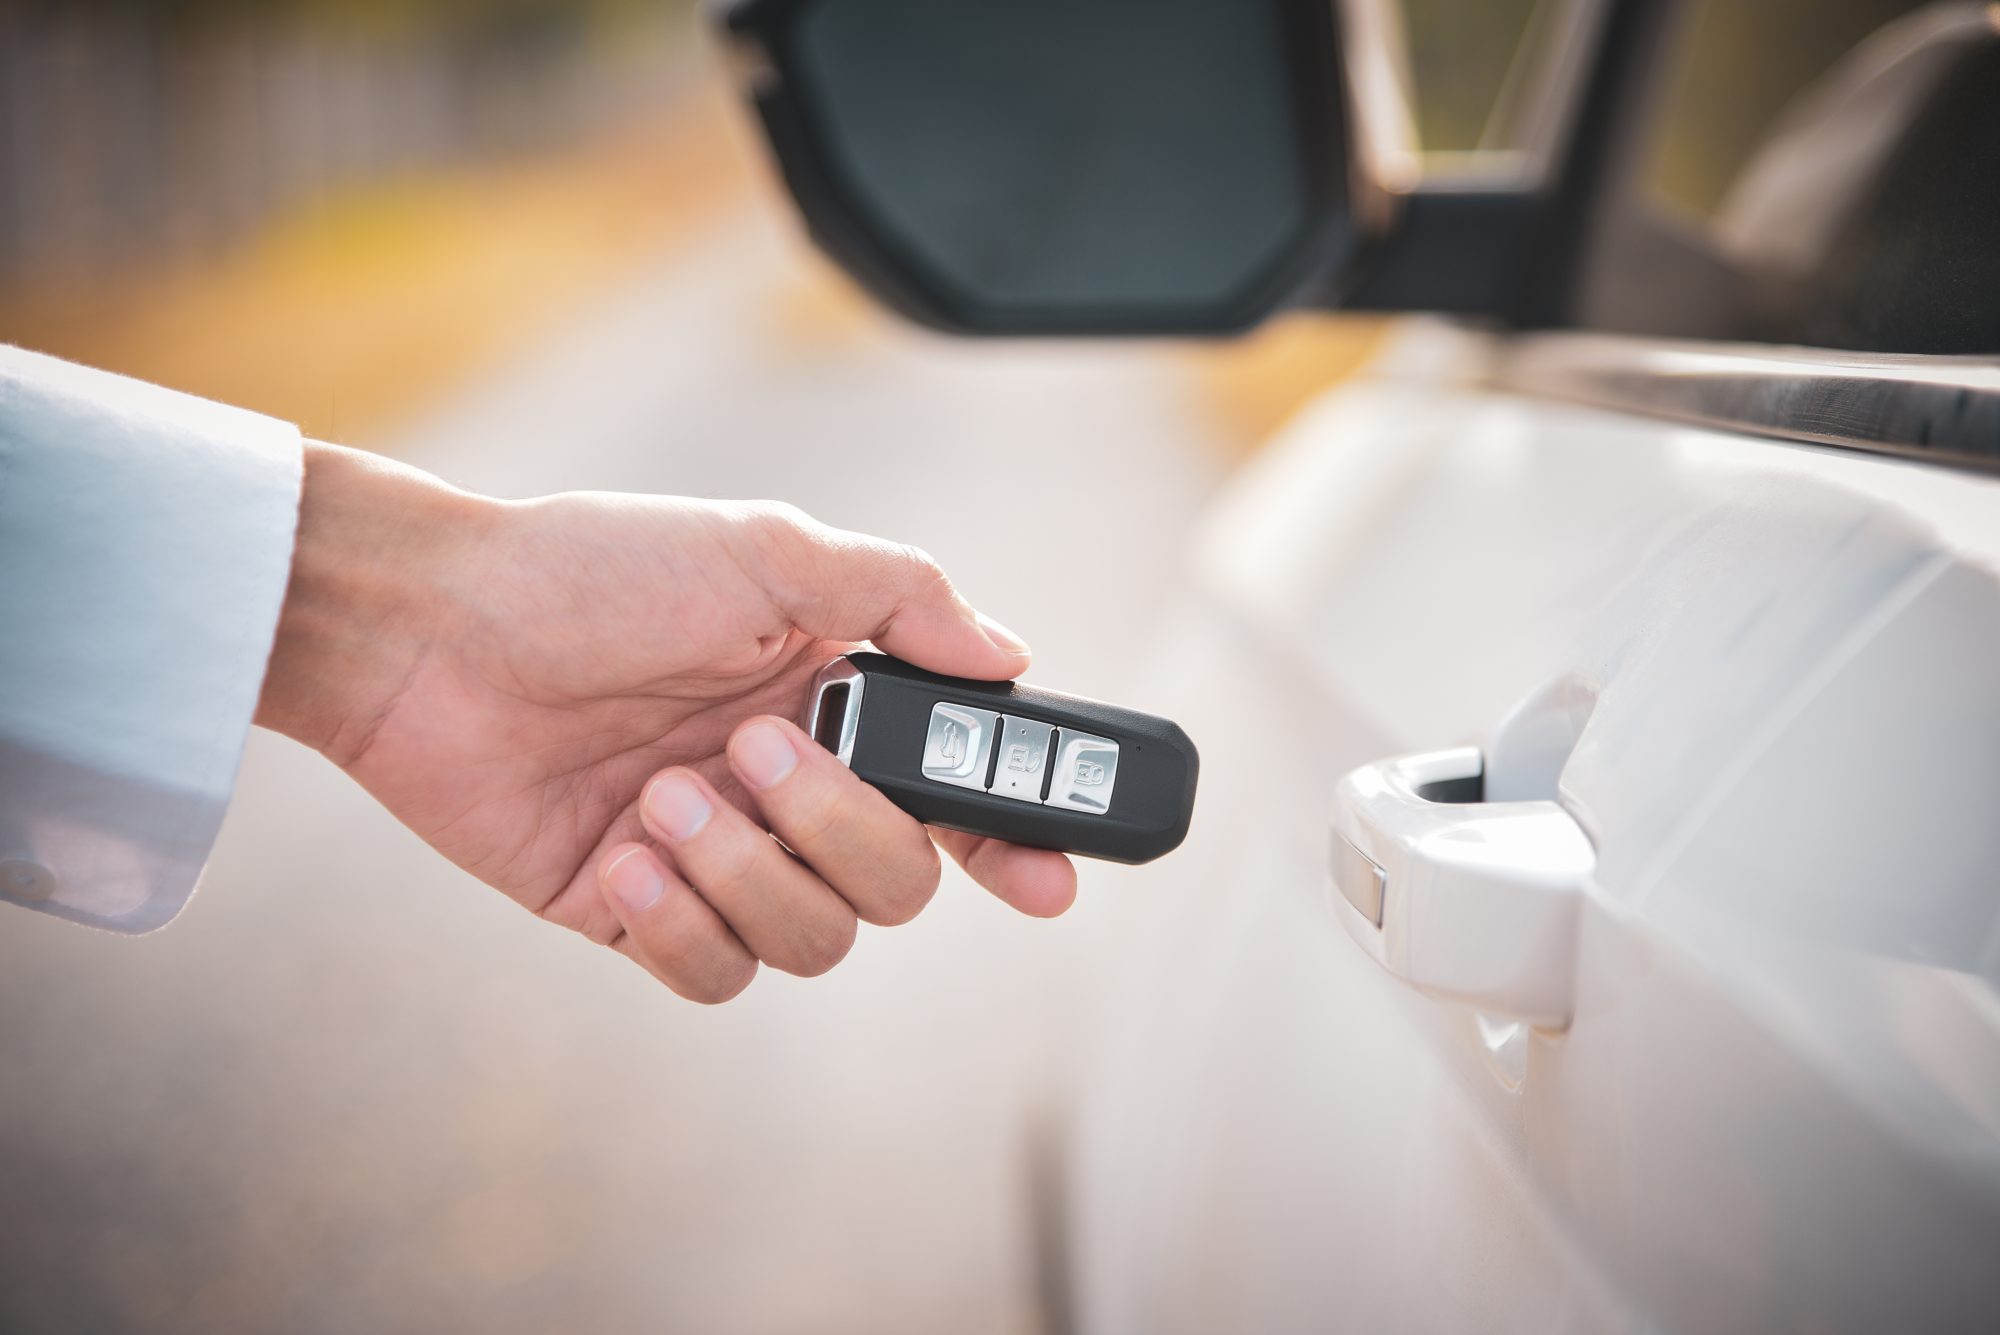 How To Change The Battery in Your Car's Key Fob